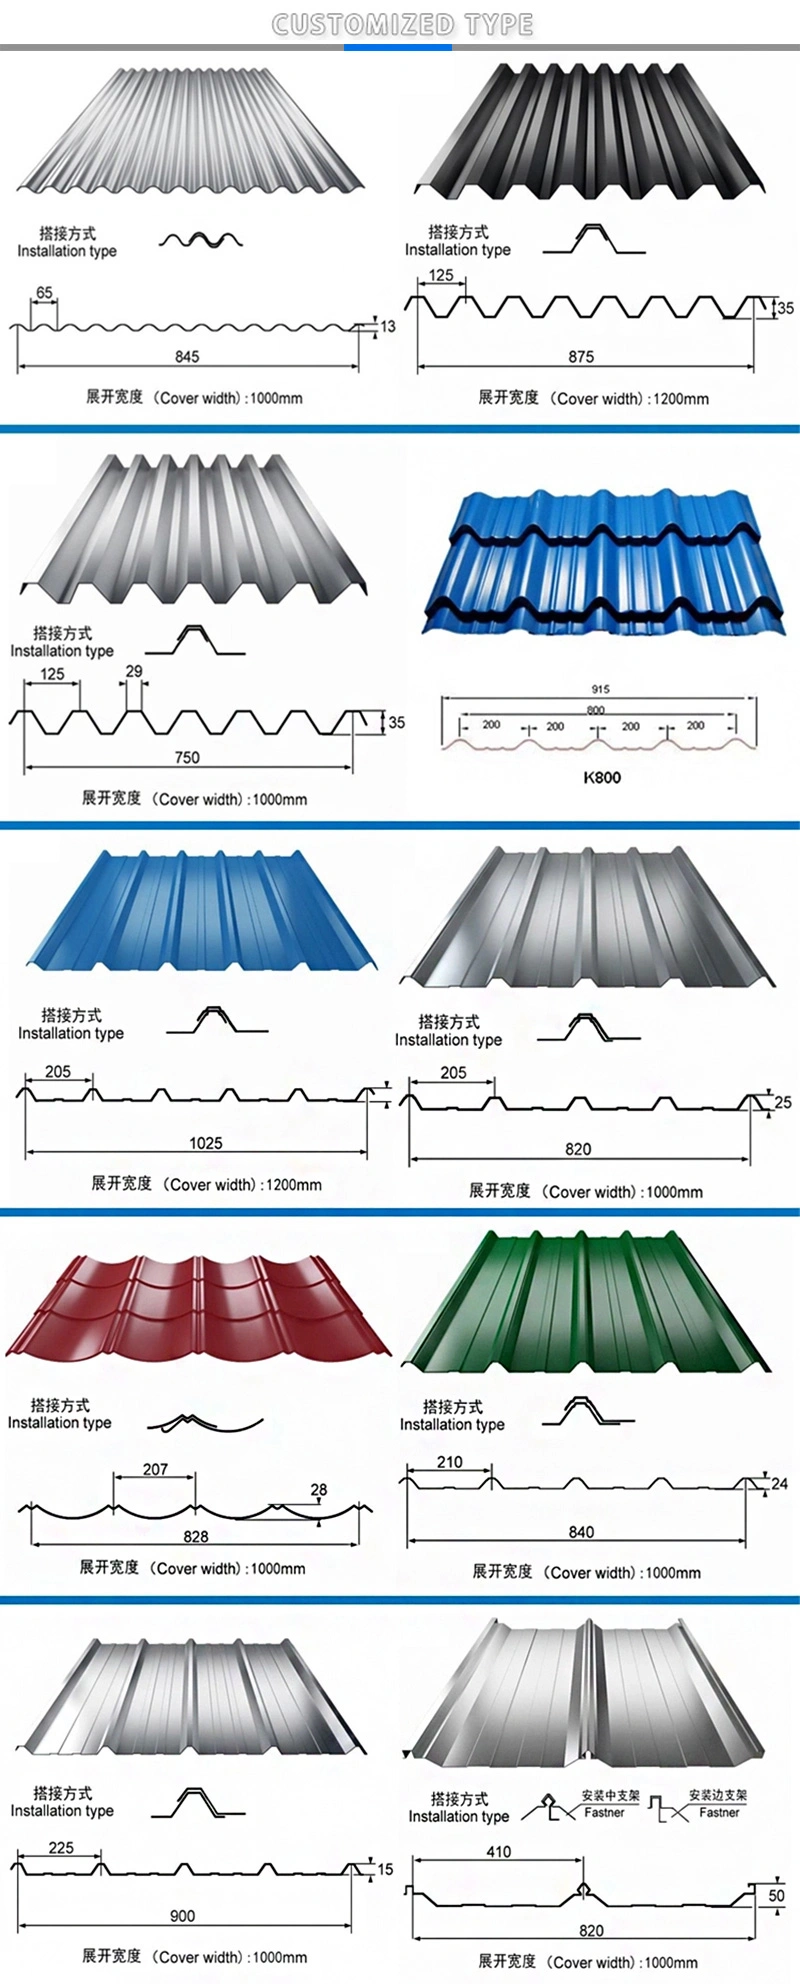 Hot Dipped Galvanized Steel Corrugated Roofing Sheets